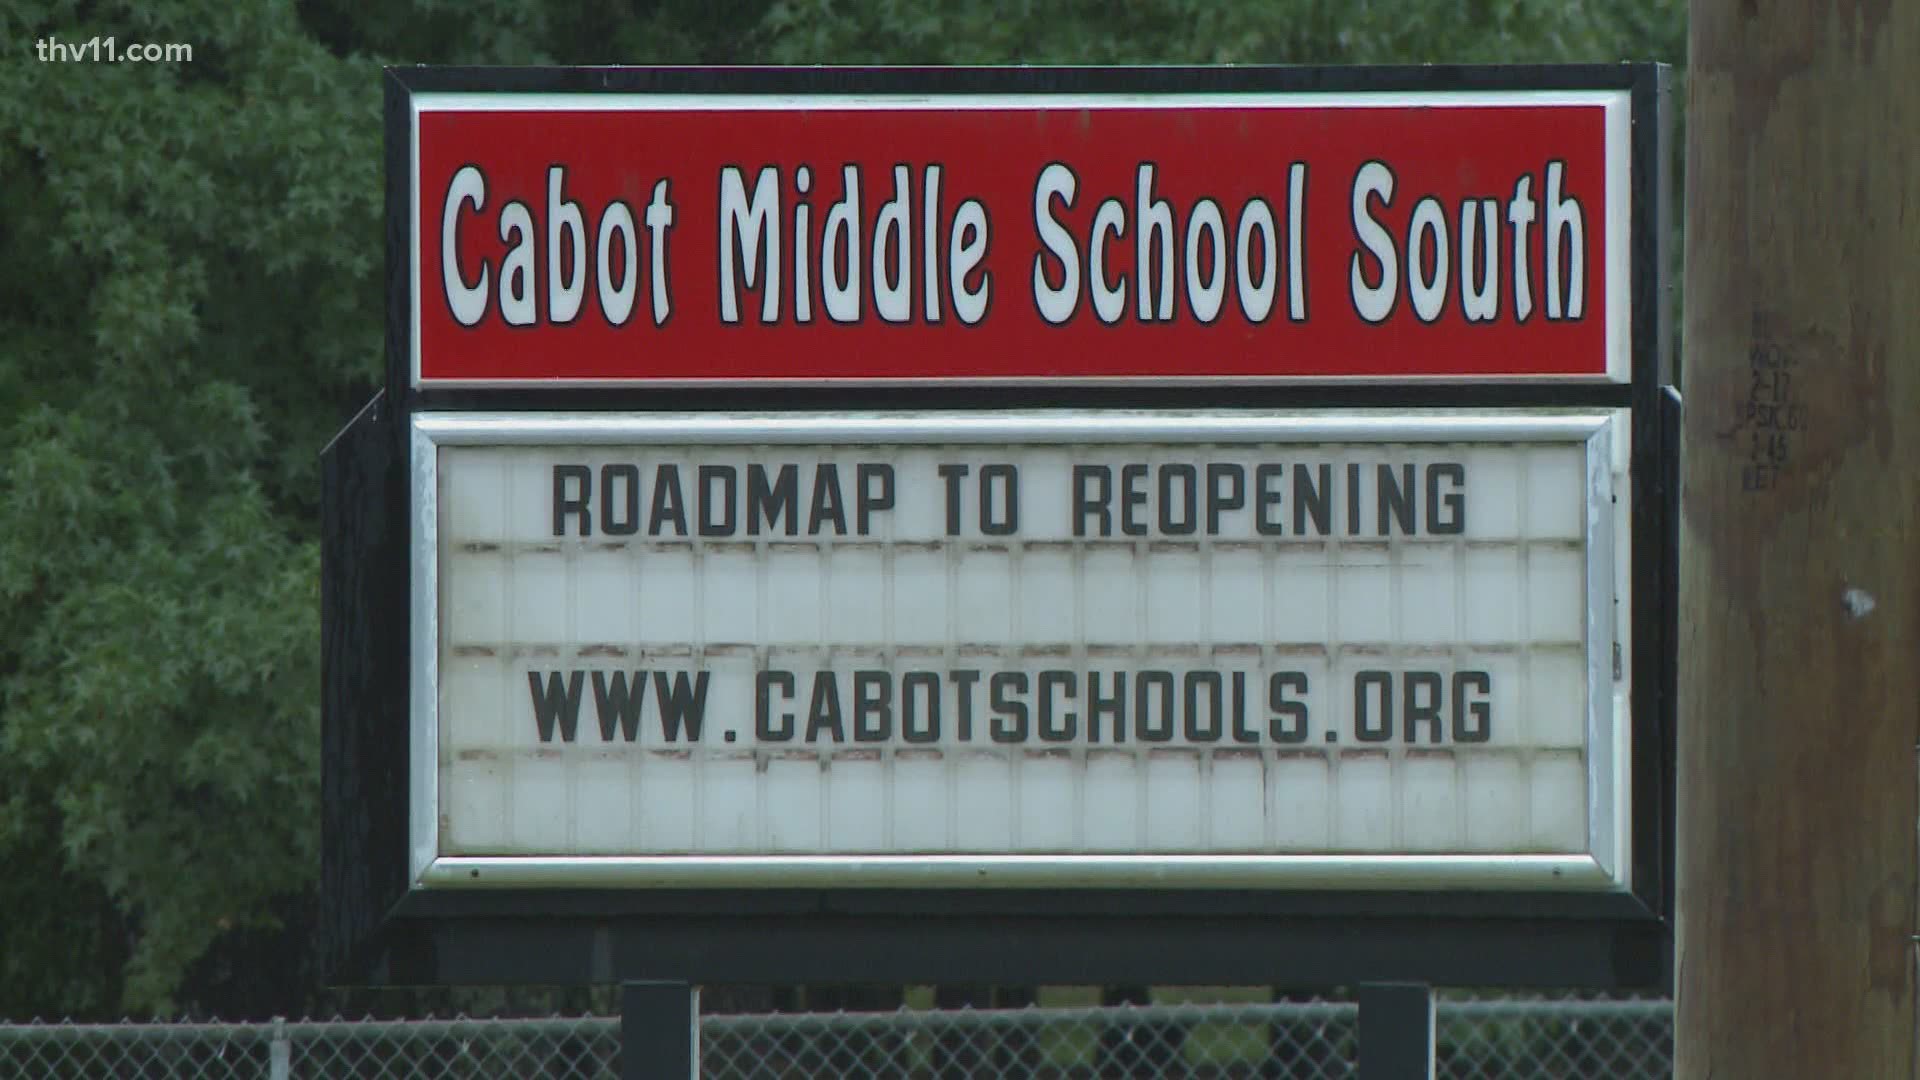 We're checking in with some of central Arkansas's largest school districts to see their back to school plans during this unique year.